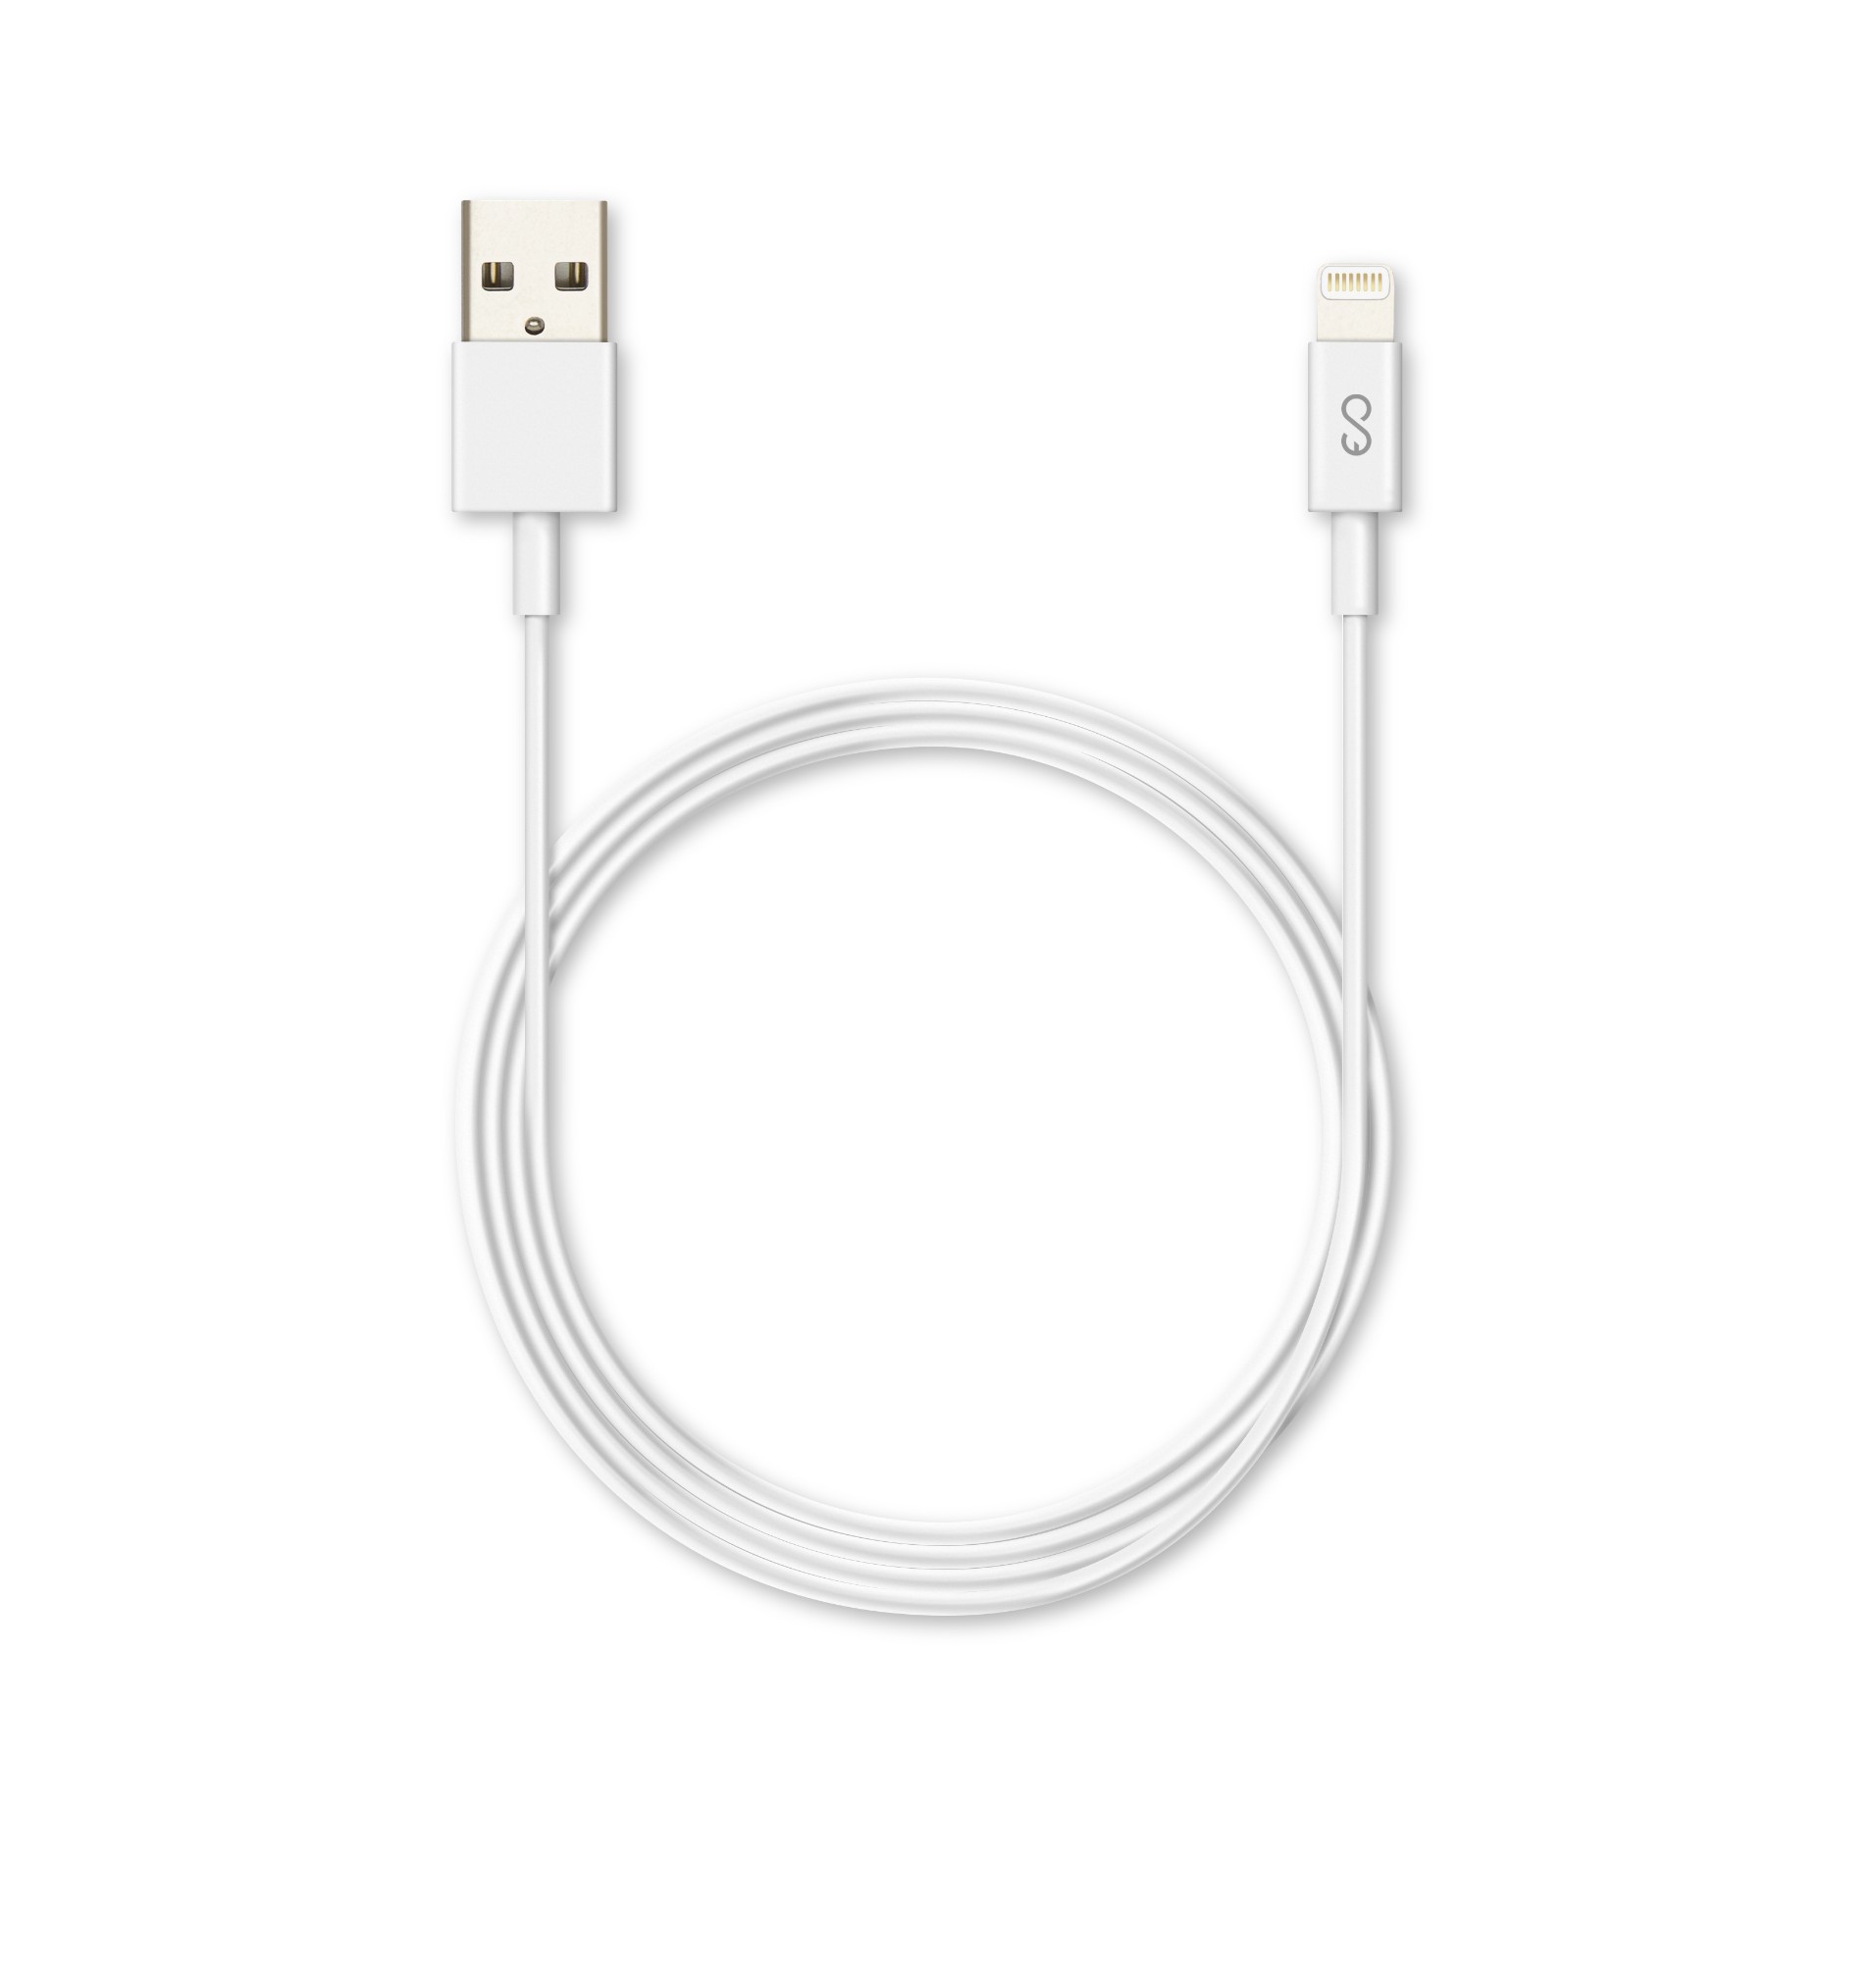 Photos - Cable (video, audio, USB) EPICO 9915101100101 lightning cable 1 m White 